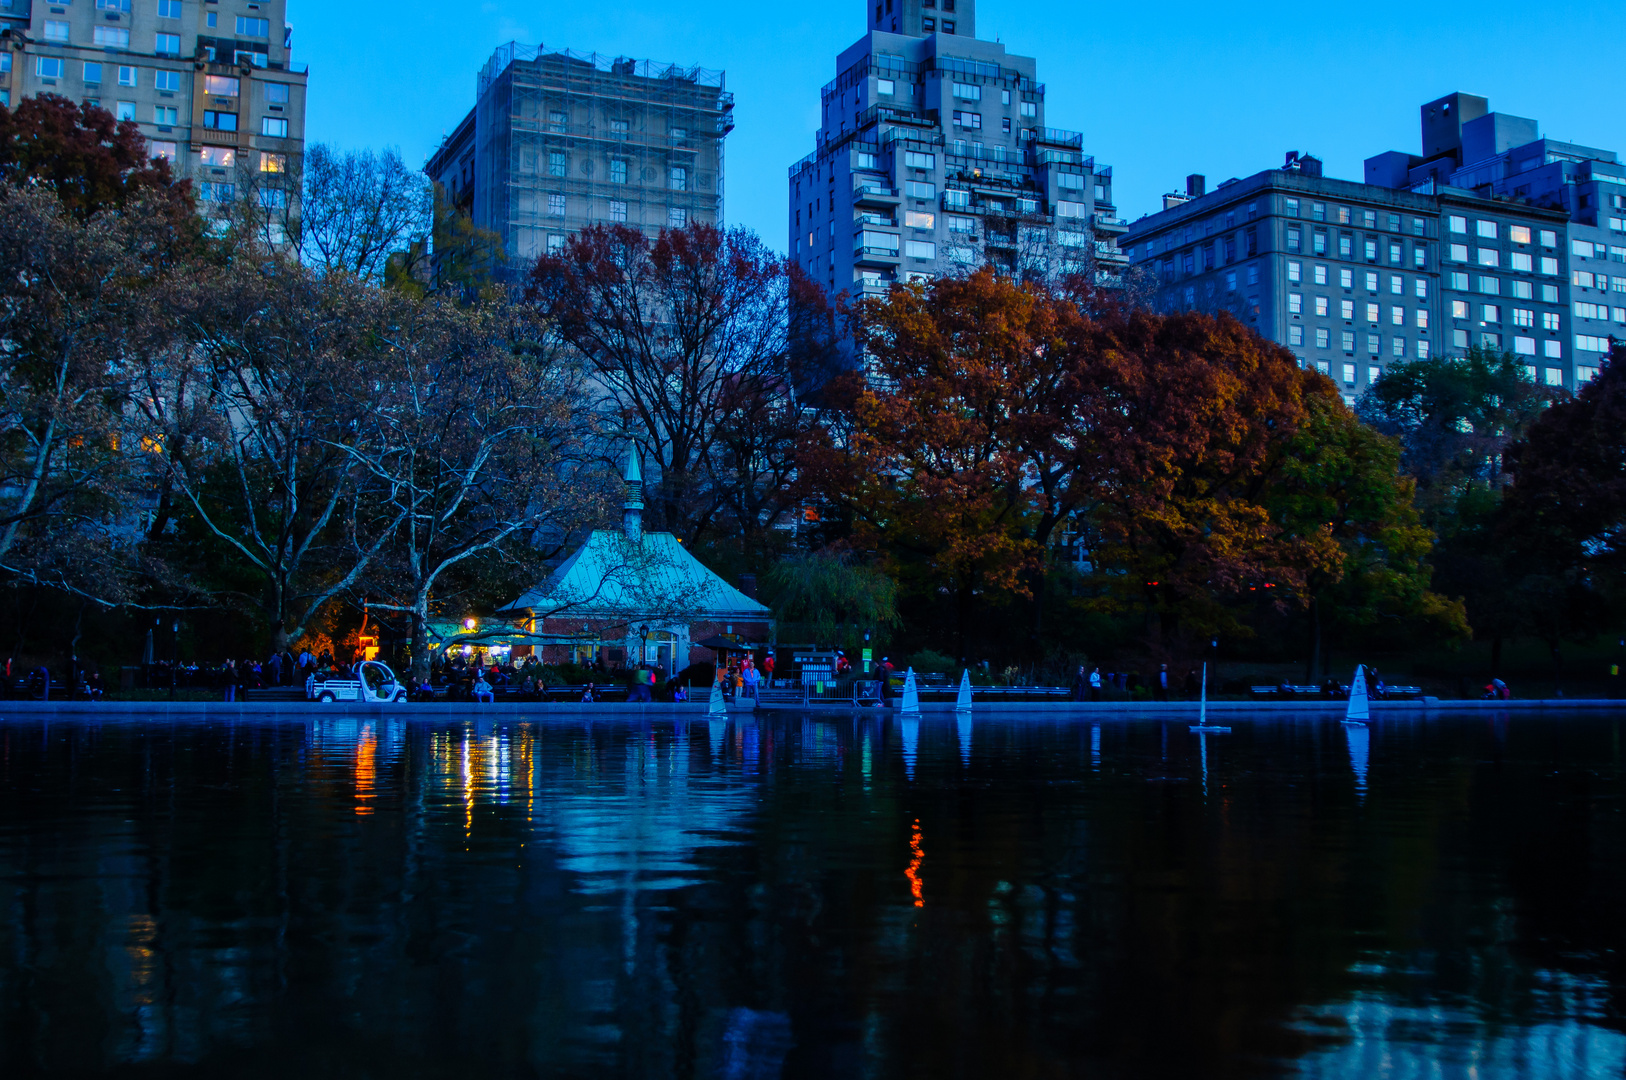 Sailing Boats in Central Park at Sunset